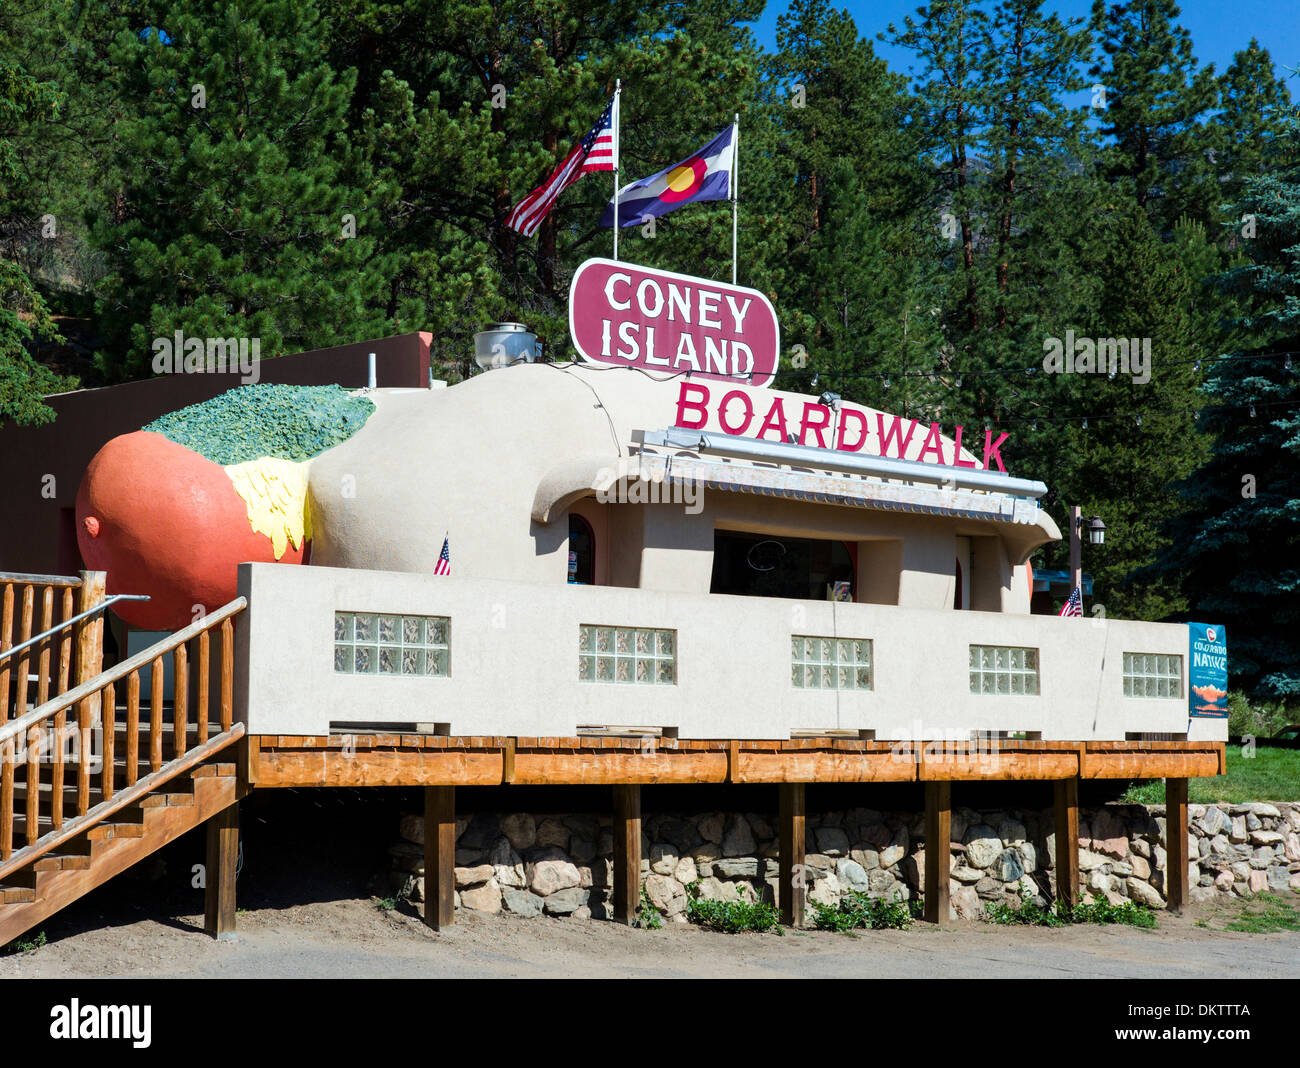 Coney Island Colorado in Bailey, Colorado is a 1950s diner shaped like a giant hot dog, with toppings. Stock Photo